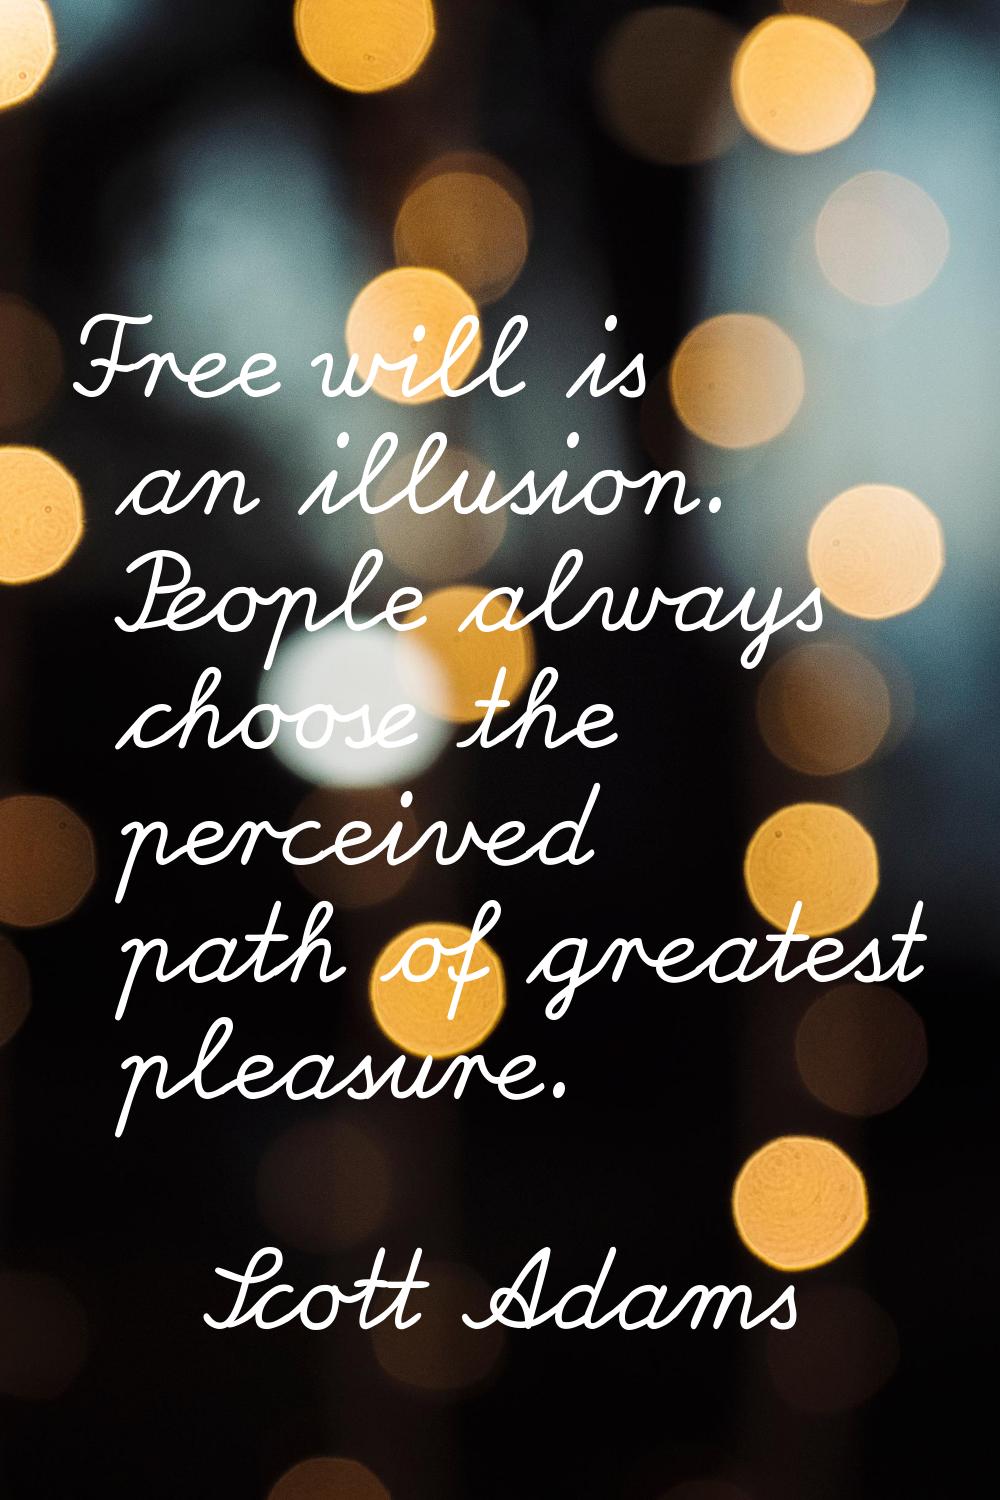 Free will is an illusion. People always choose the perceived path of greatest pleasure.